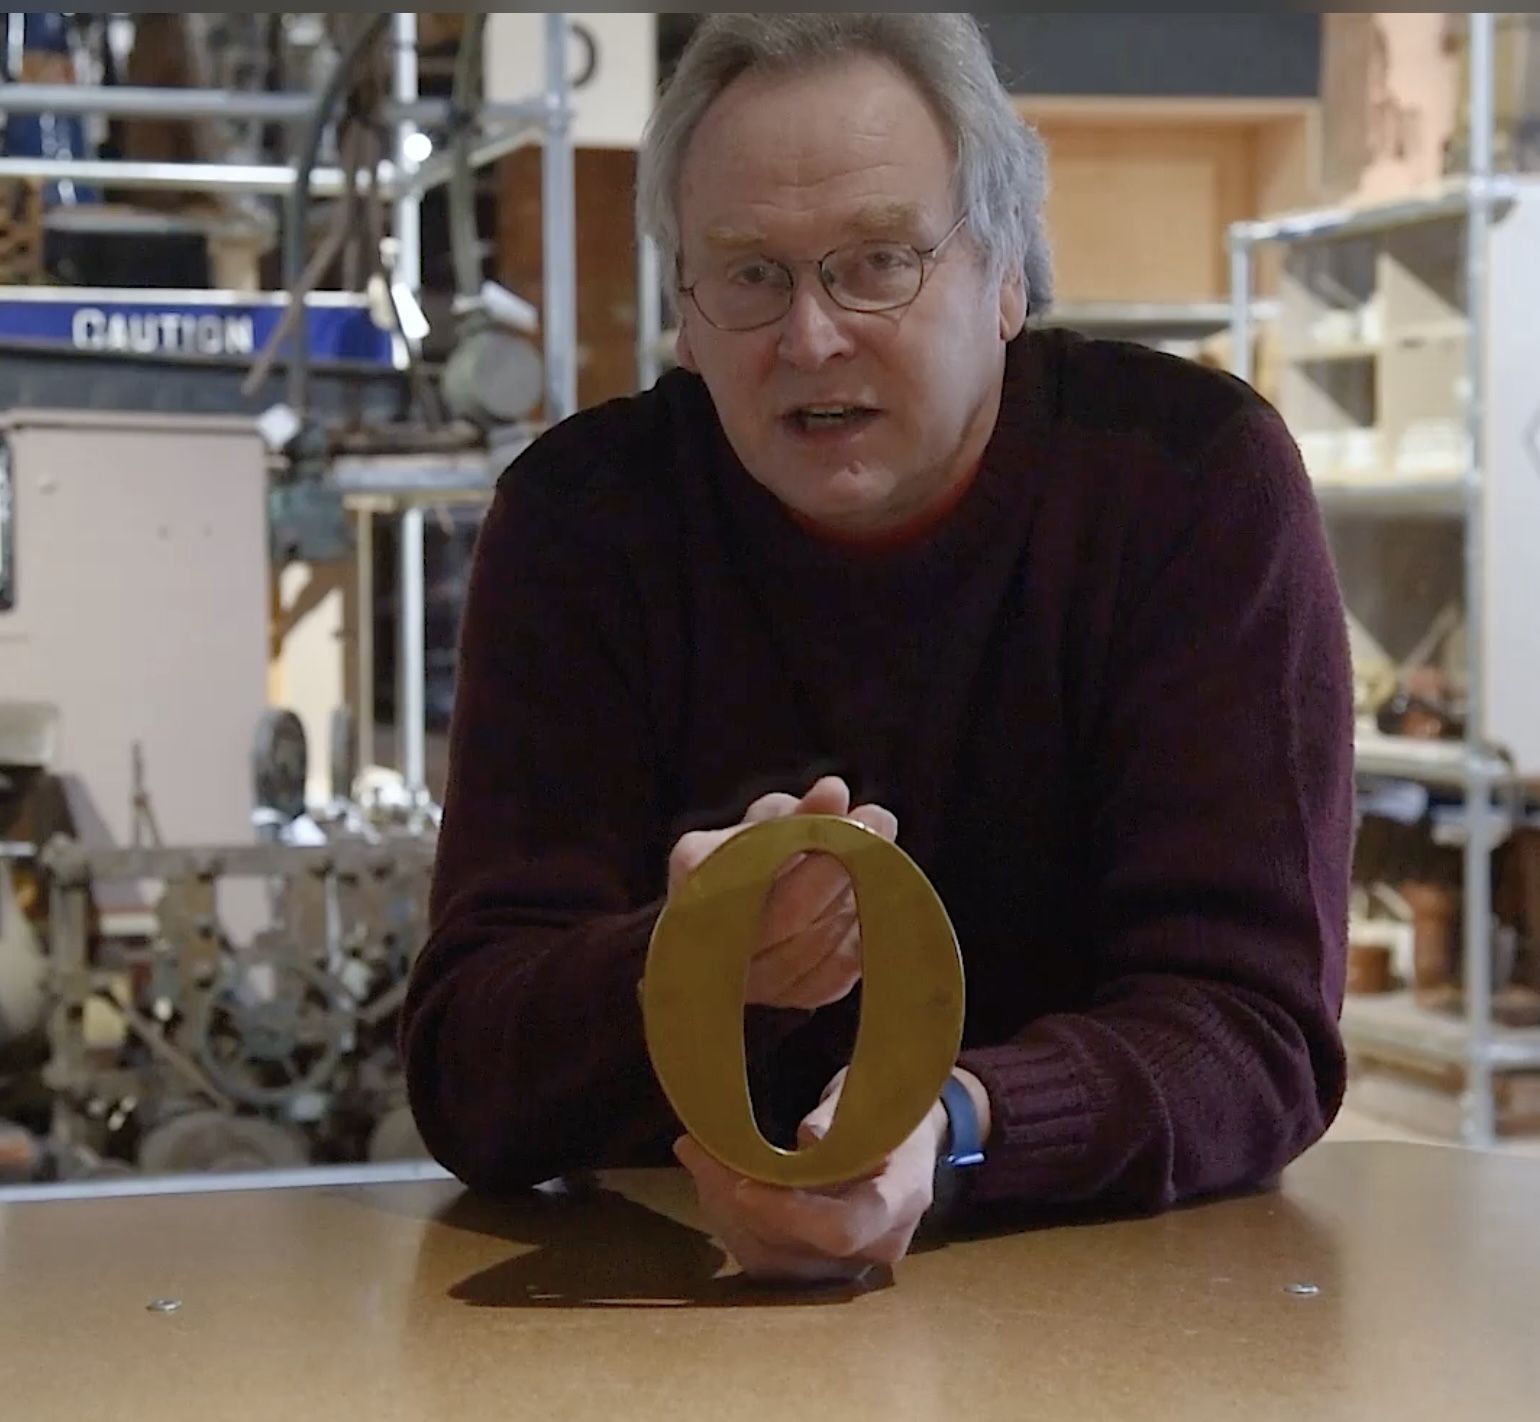 The Study Centre co-ordinator, Dave Harris, holds a brass figure 0 which he talks about in the linked video